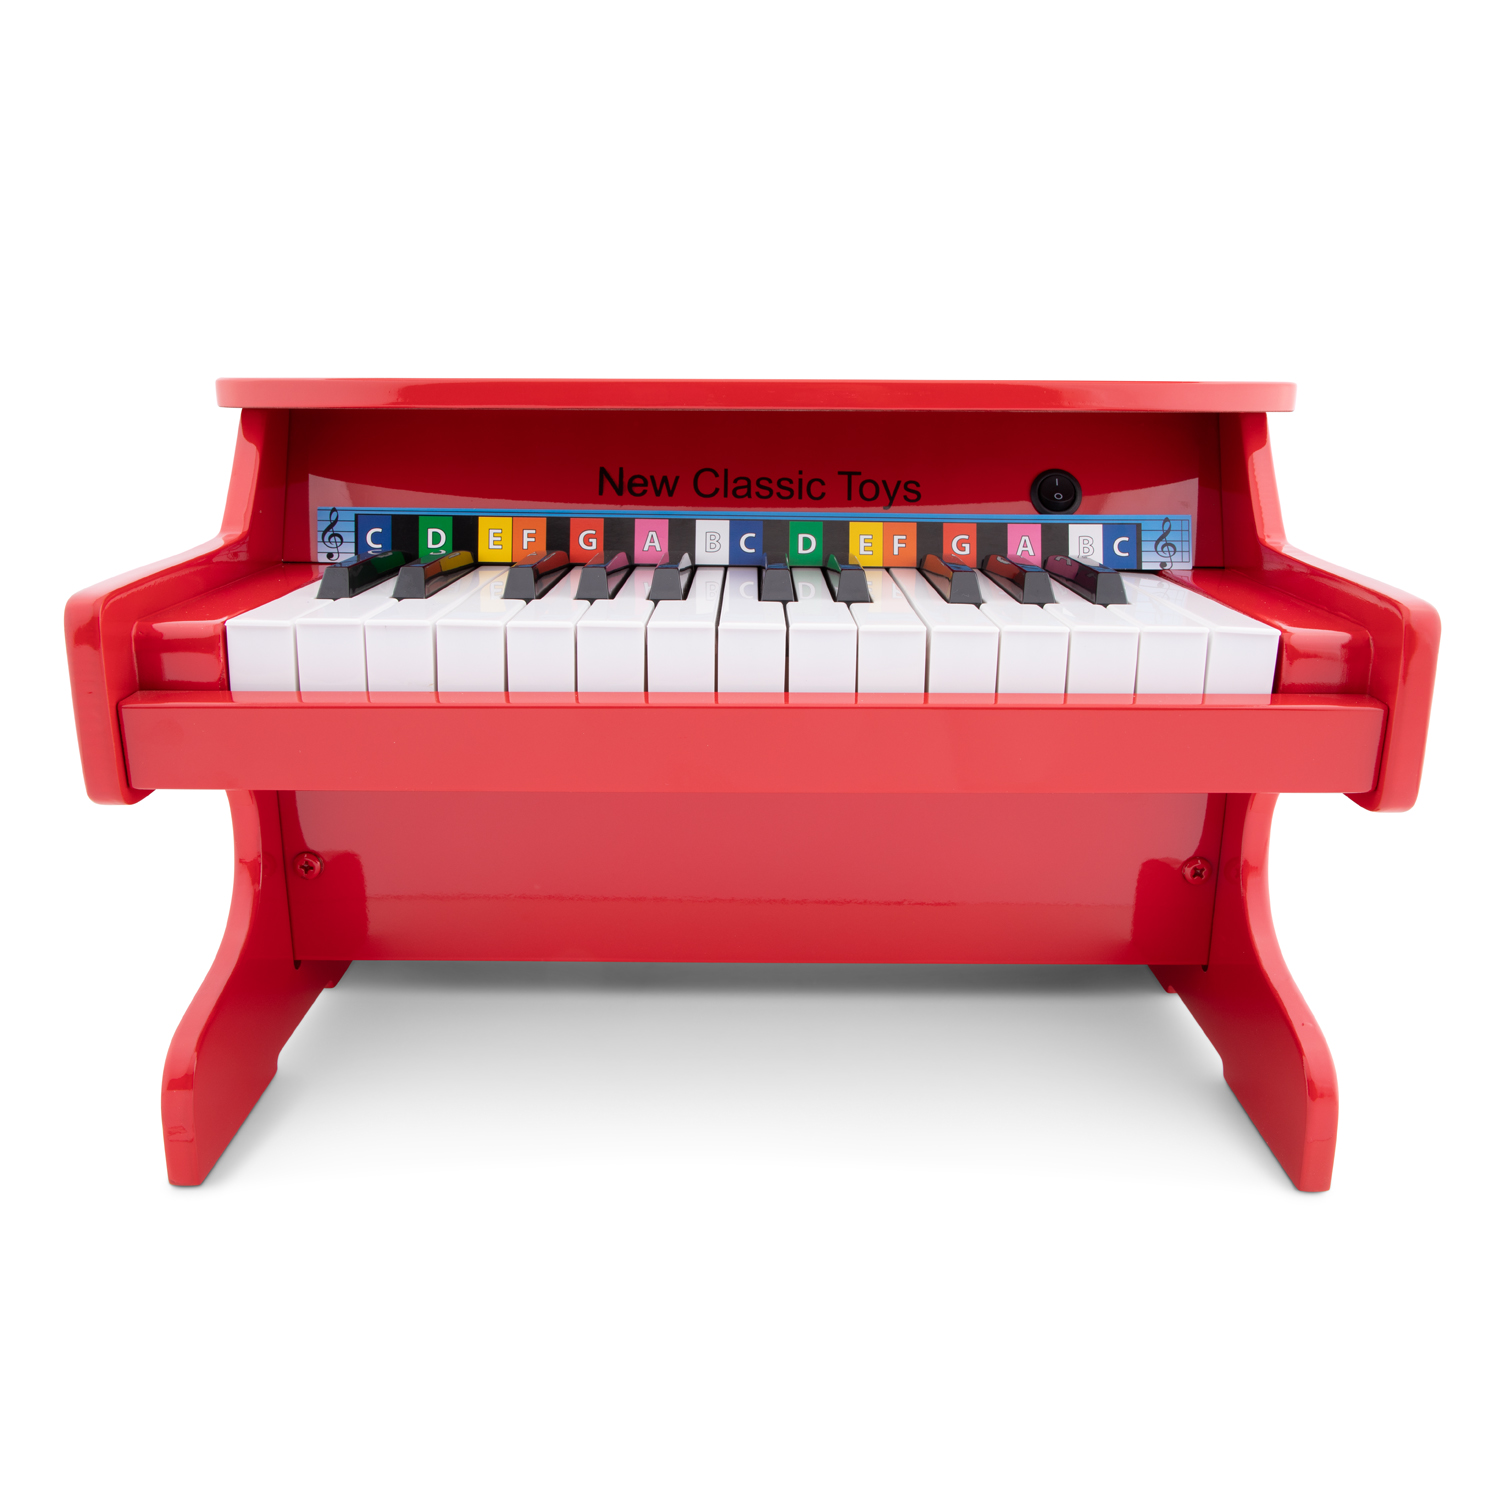 Piano Electronique rouge 25 touches - New Classic Toys 10160